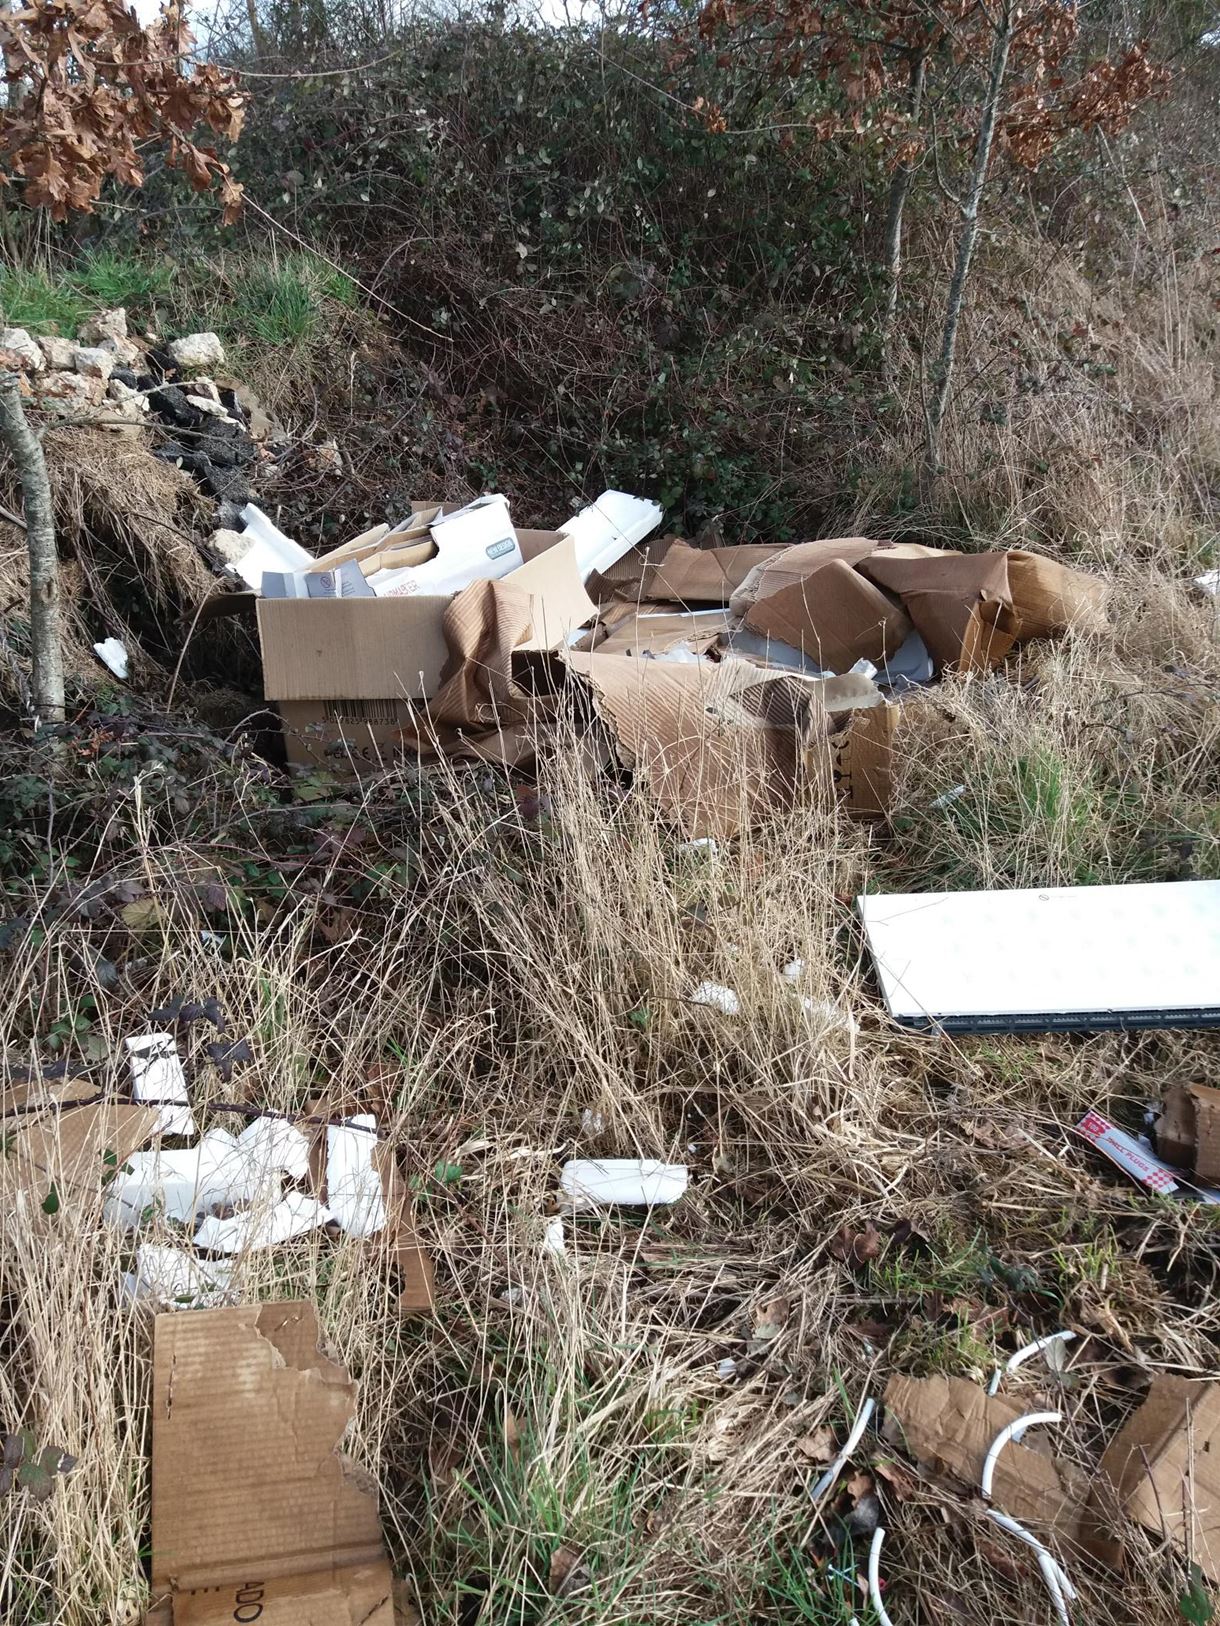 dumped storge heaters, cardboard boxes and plastic packaging near Lee Lane